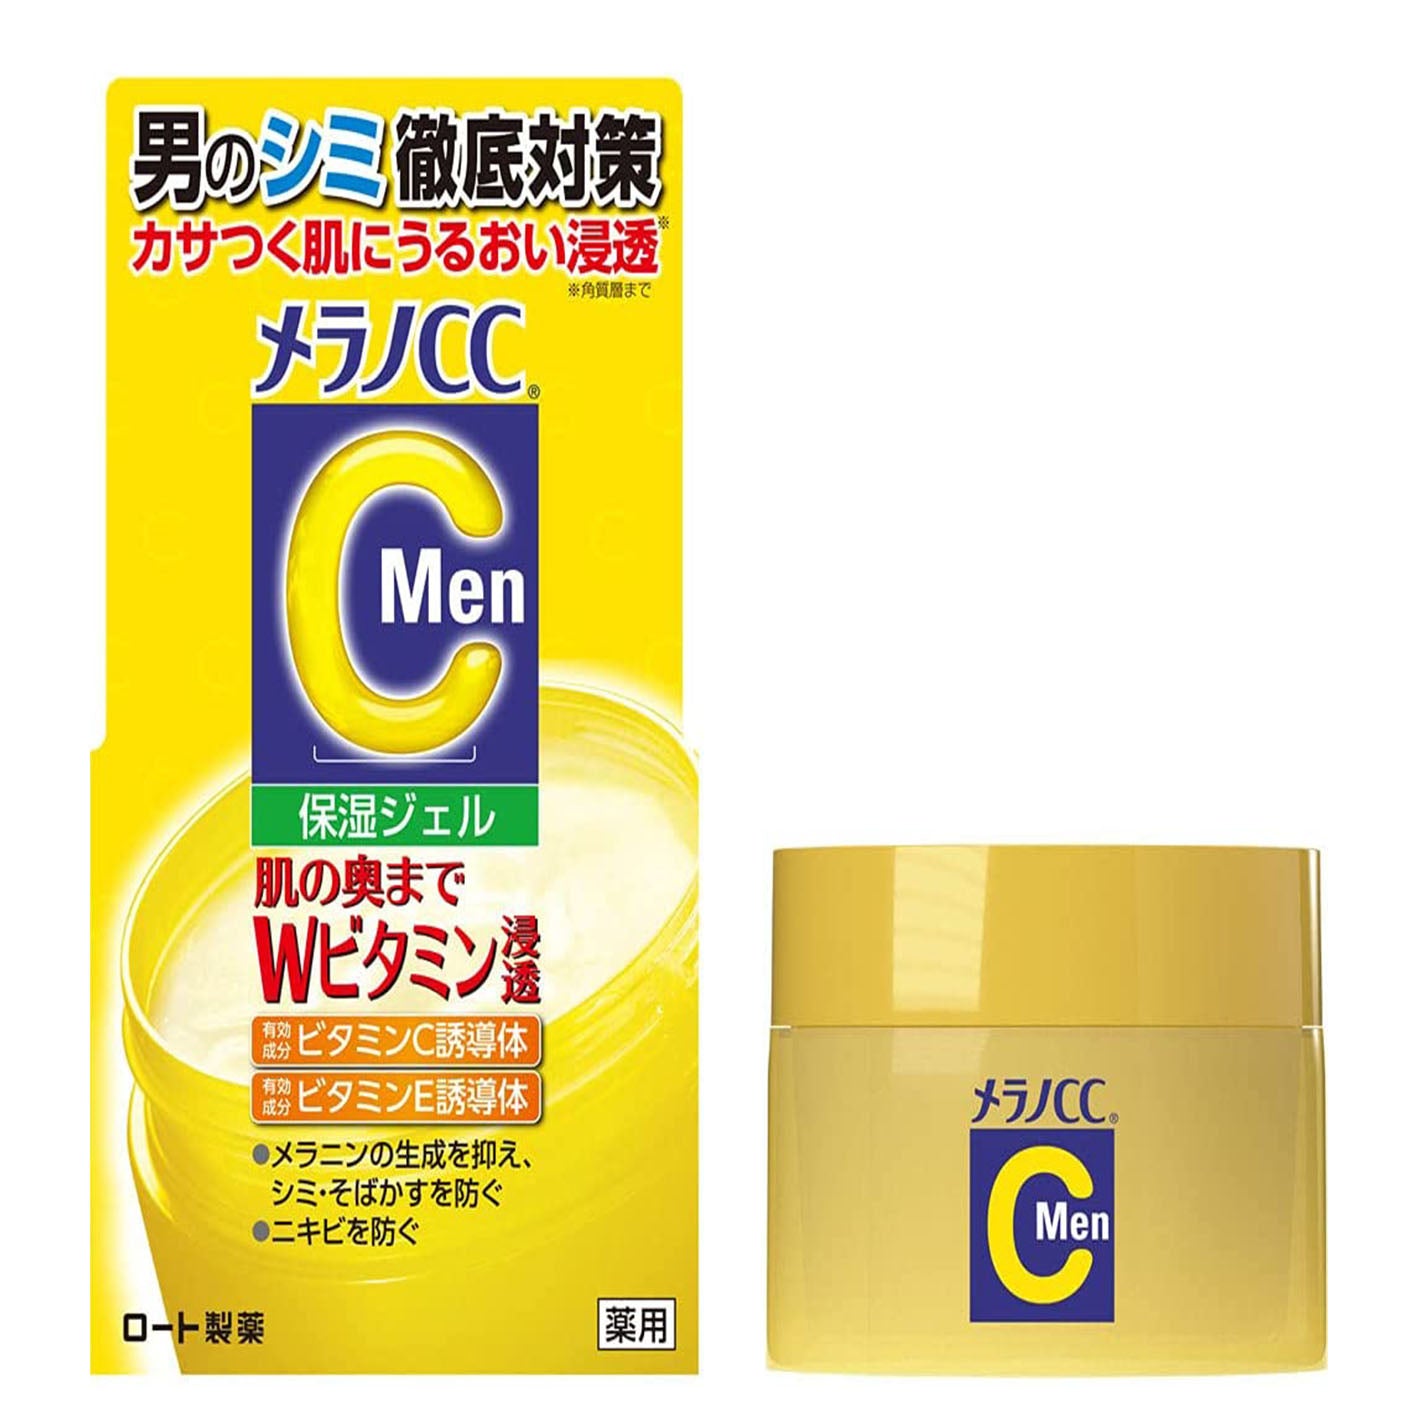 Rohto Melano CC Men Medicinal Stain Measures Whitnig Gel 100g - Harajuku Culture Japan - Japanease Products Store Beauty and Stationery